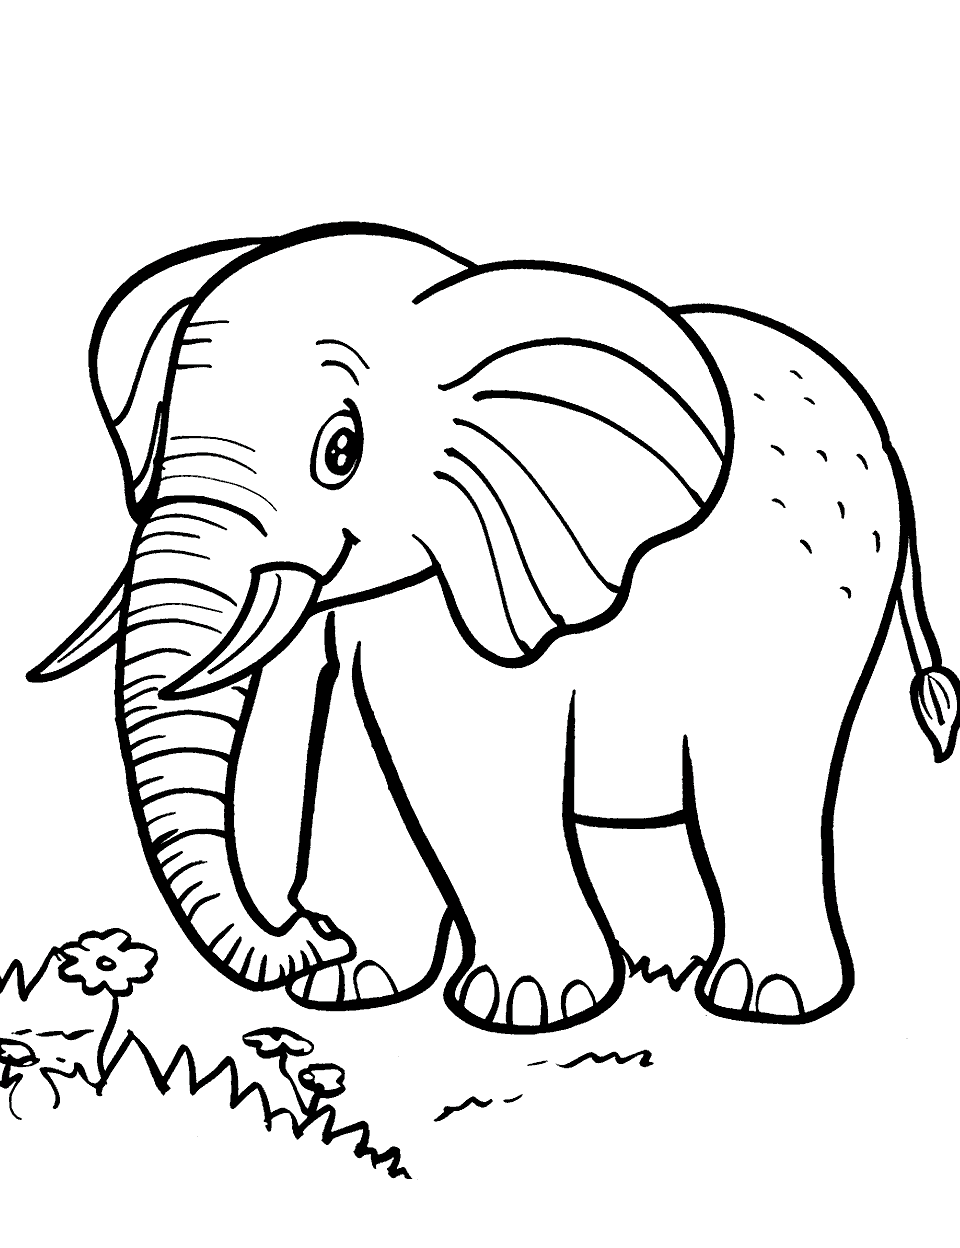 Elephant Parade Coloring Page - An elephant walking through the Savannah.